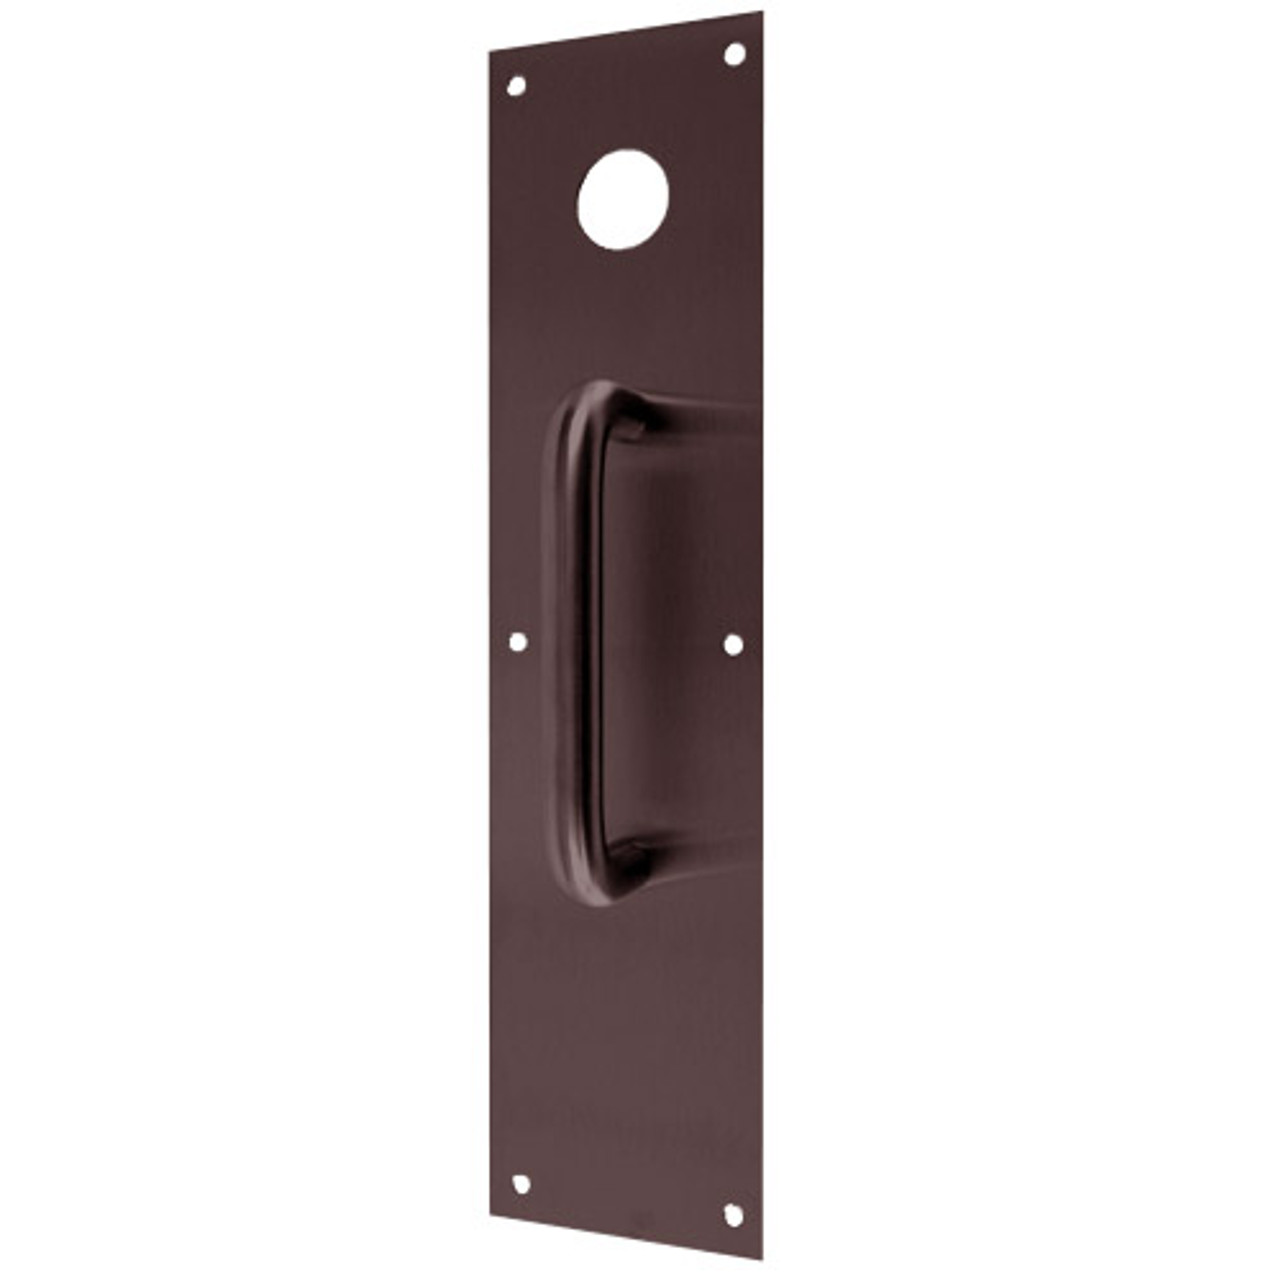 CFK7015-613 Don Jo Pull Plates with Holes in Oil Rubbed Bronze Finish